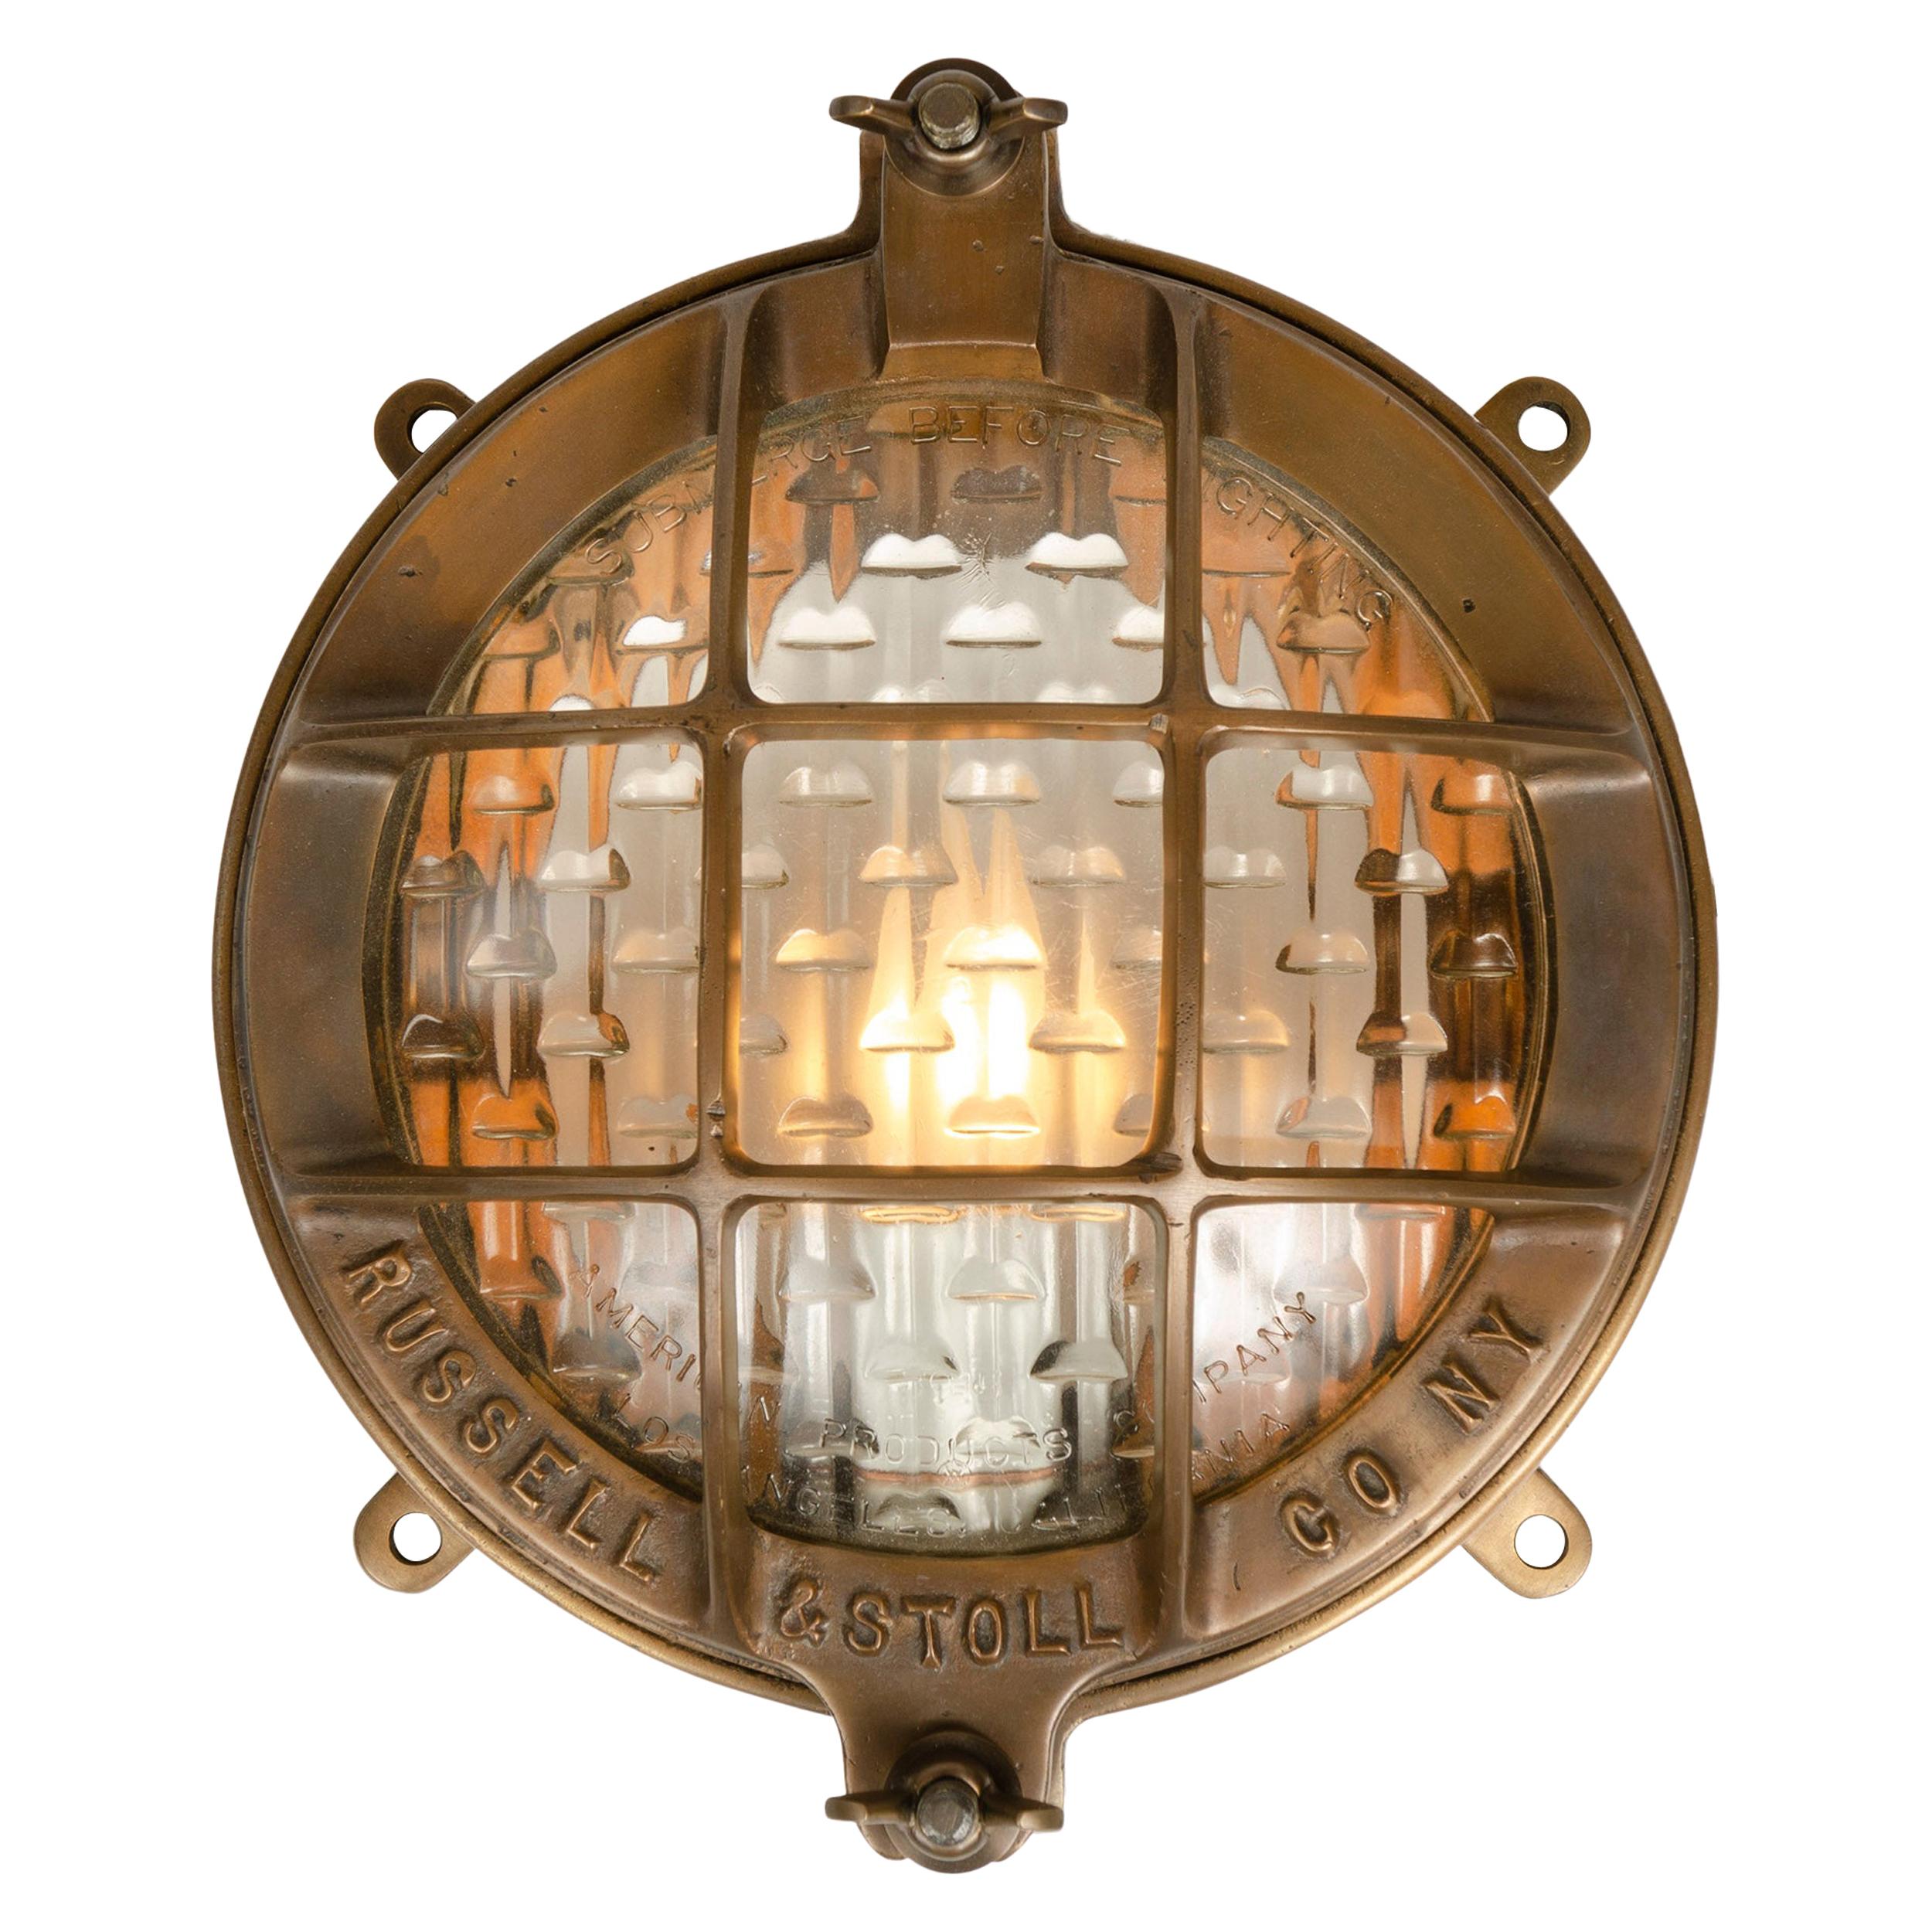 Early 20th Century Cast Bronze Lamp by Russell & Stoll Co.